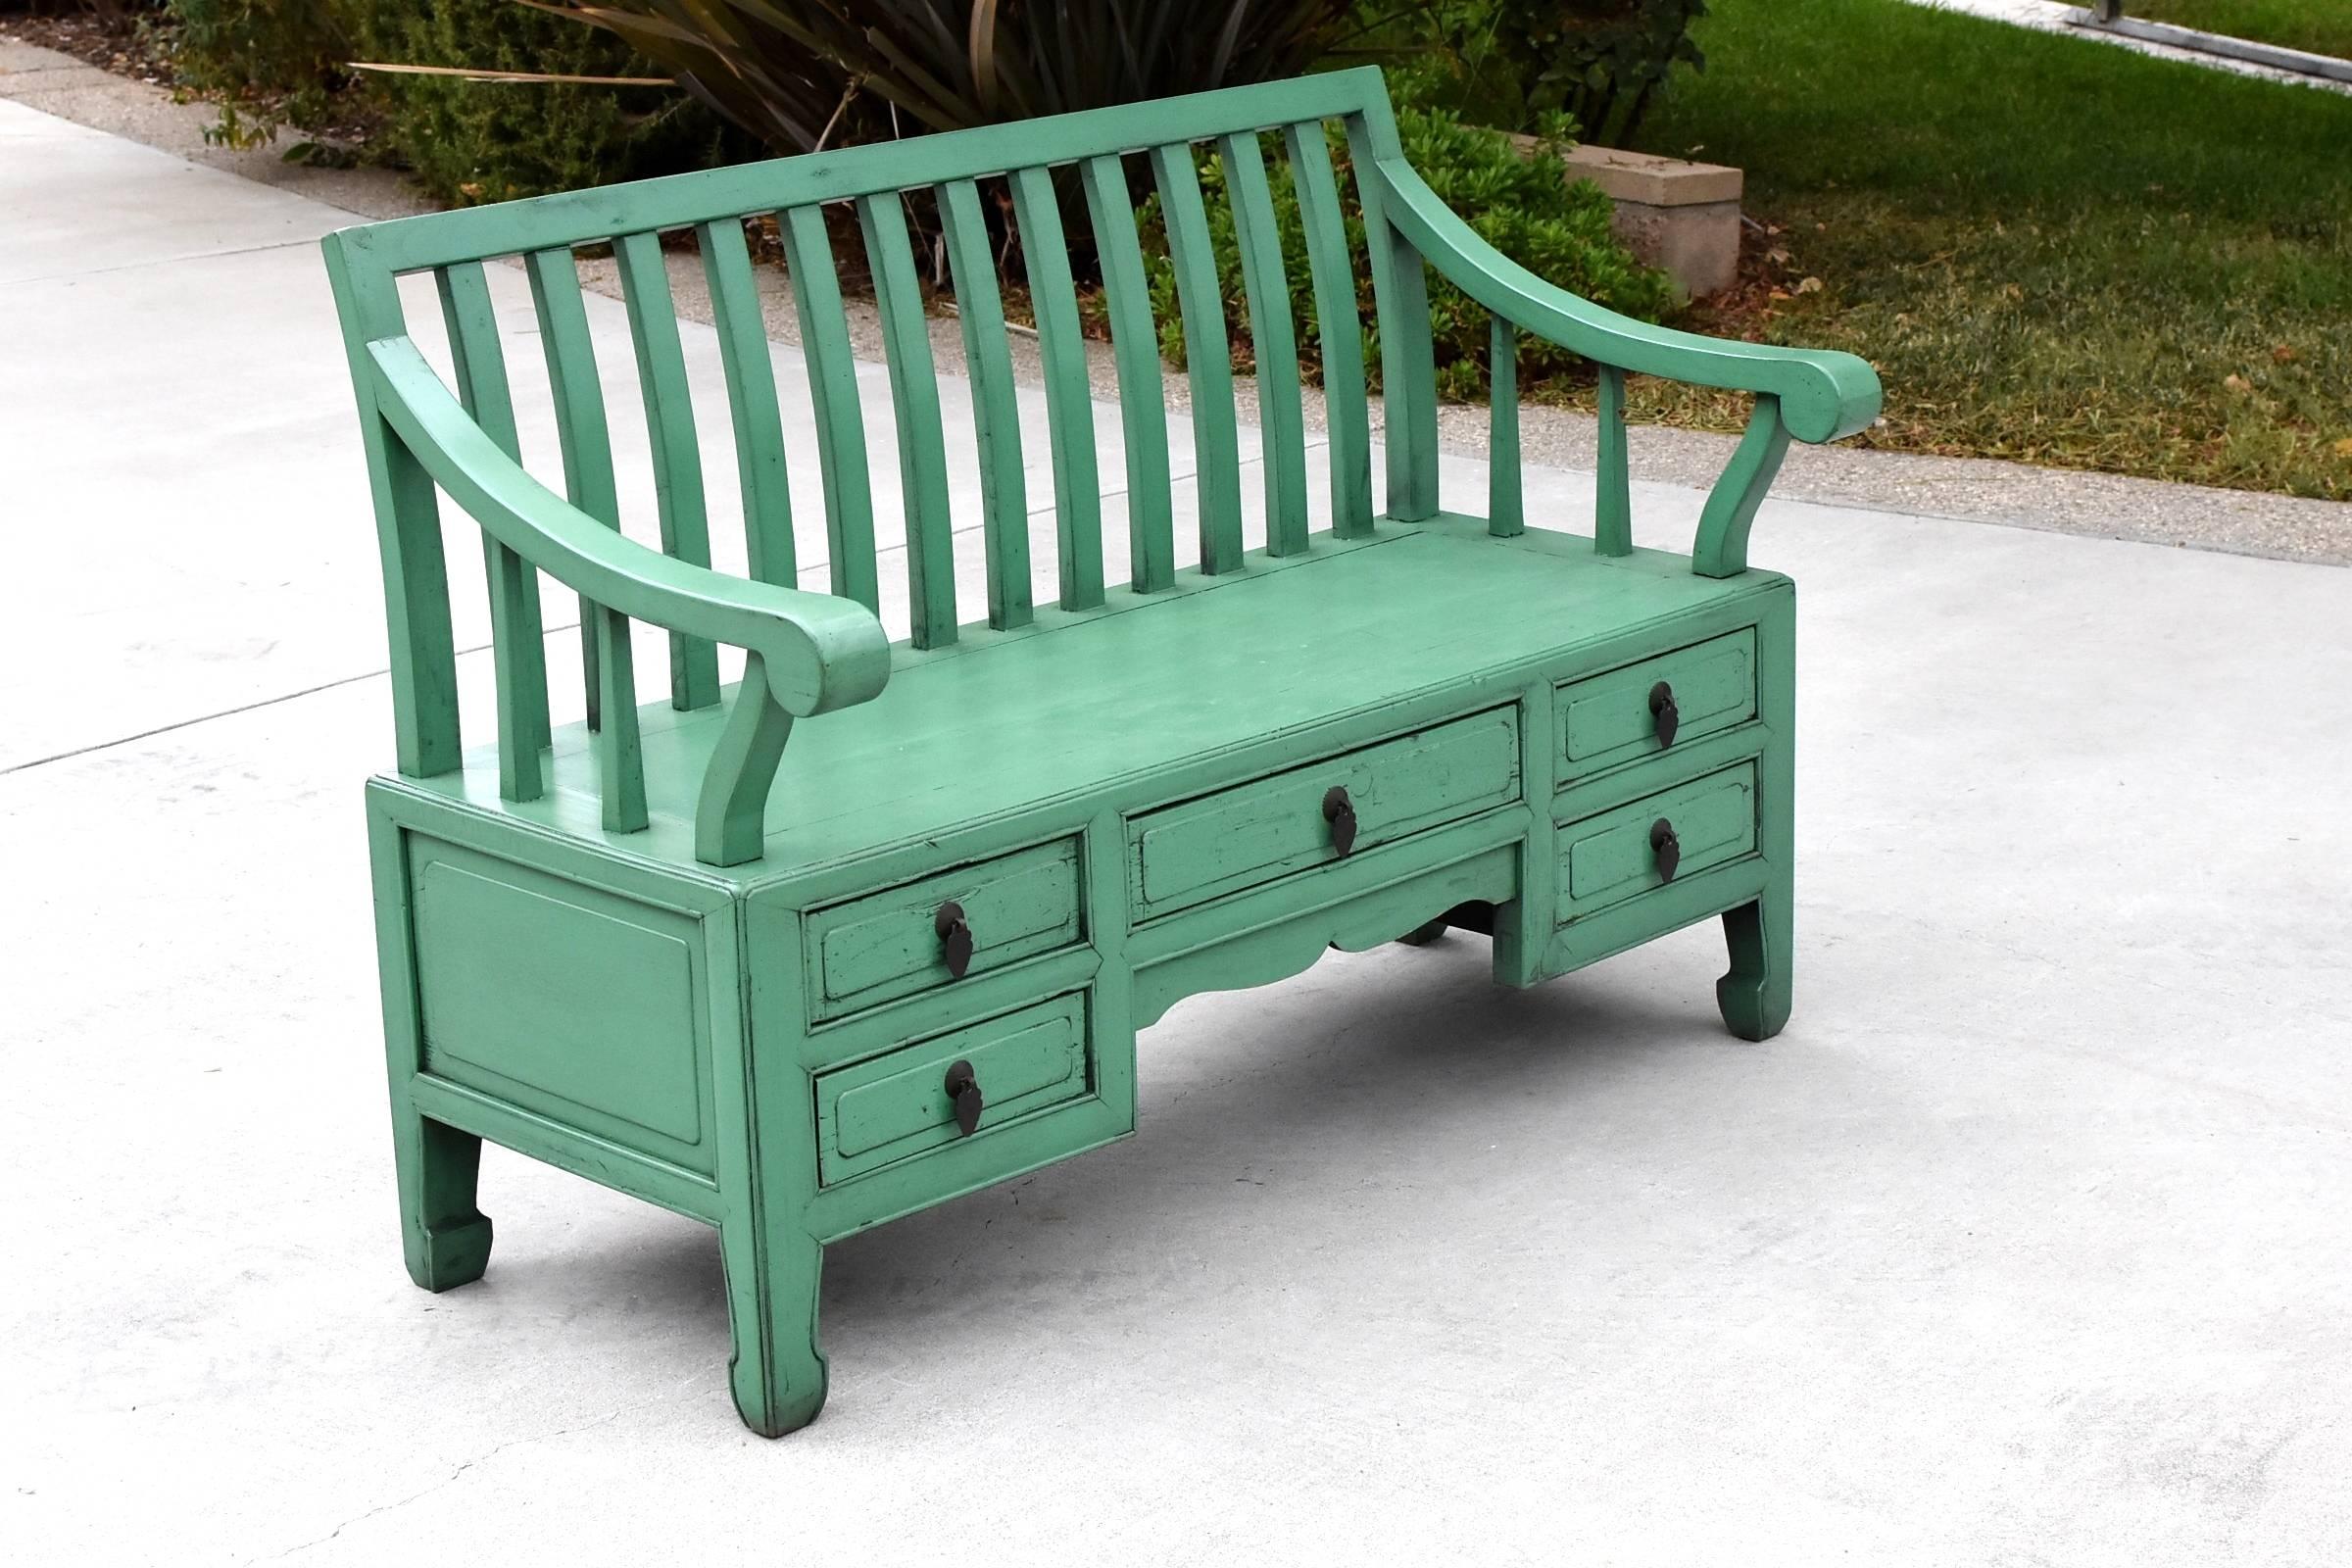 Beautiful settee has graceful back and arms with five full length drawers. Fabulous green finish enhances its charm. A perfect piece for a sun room, a garden, in the hall way near the entrance of the home, or any areas you need seating. Solid wood.